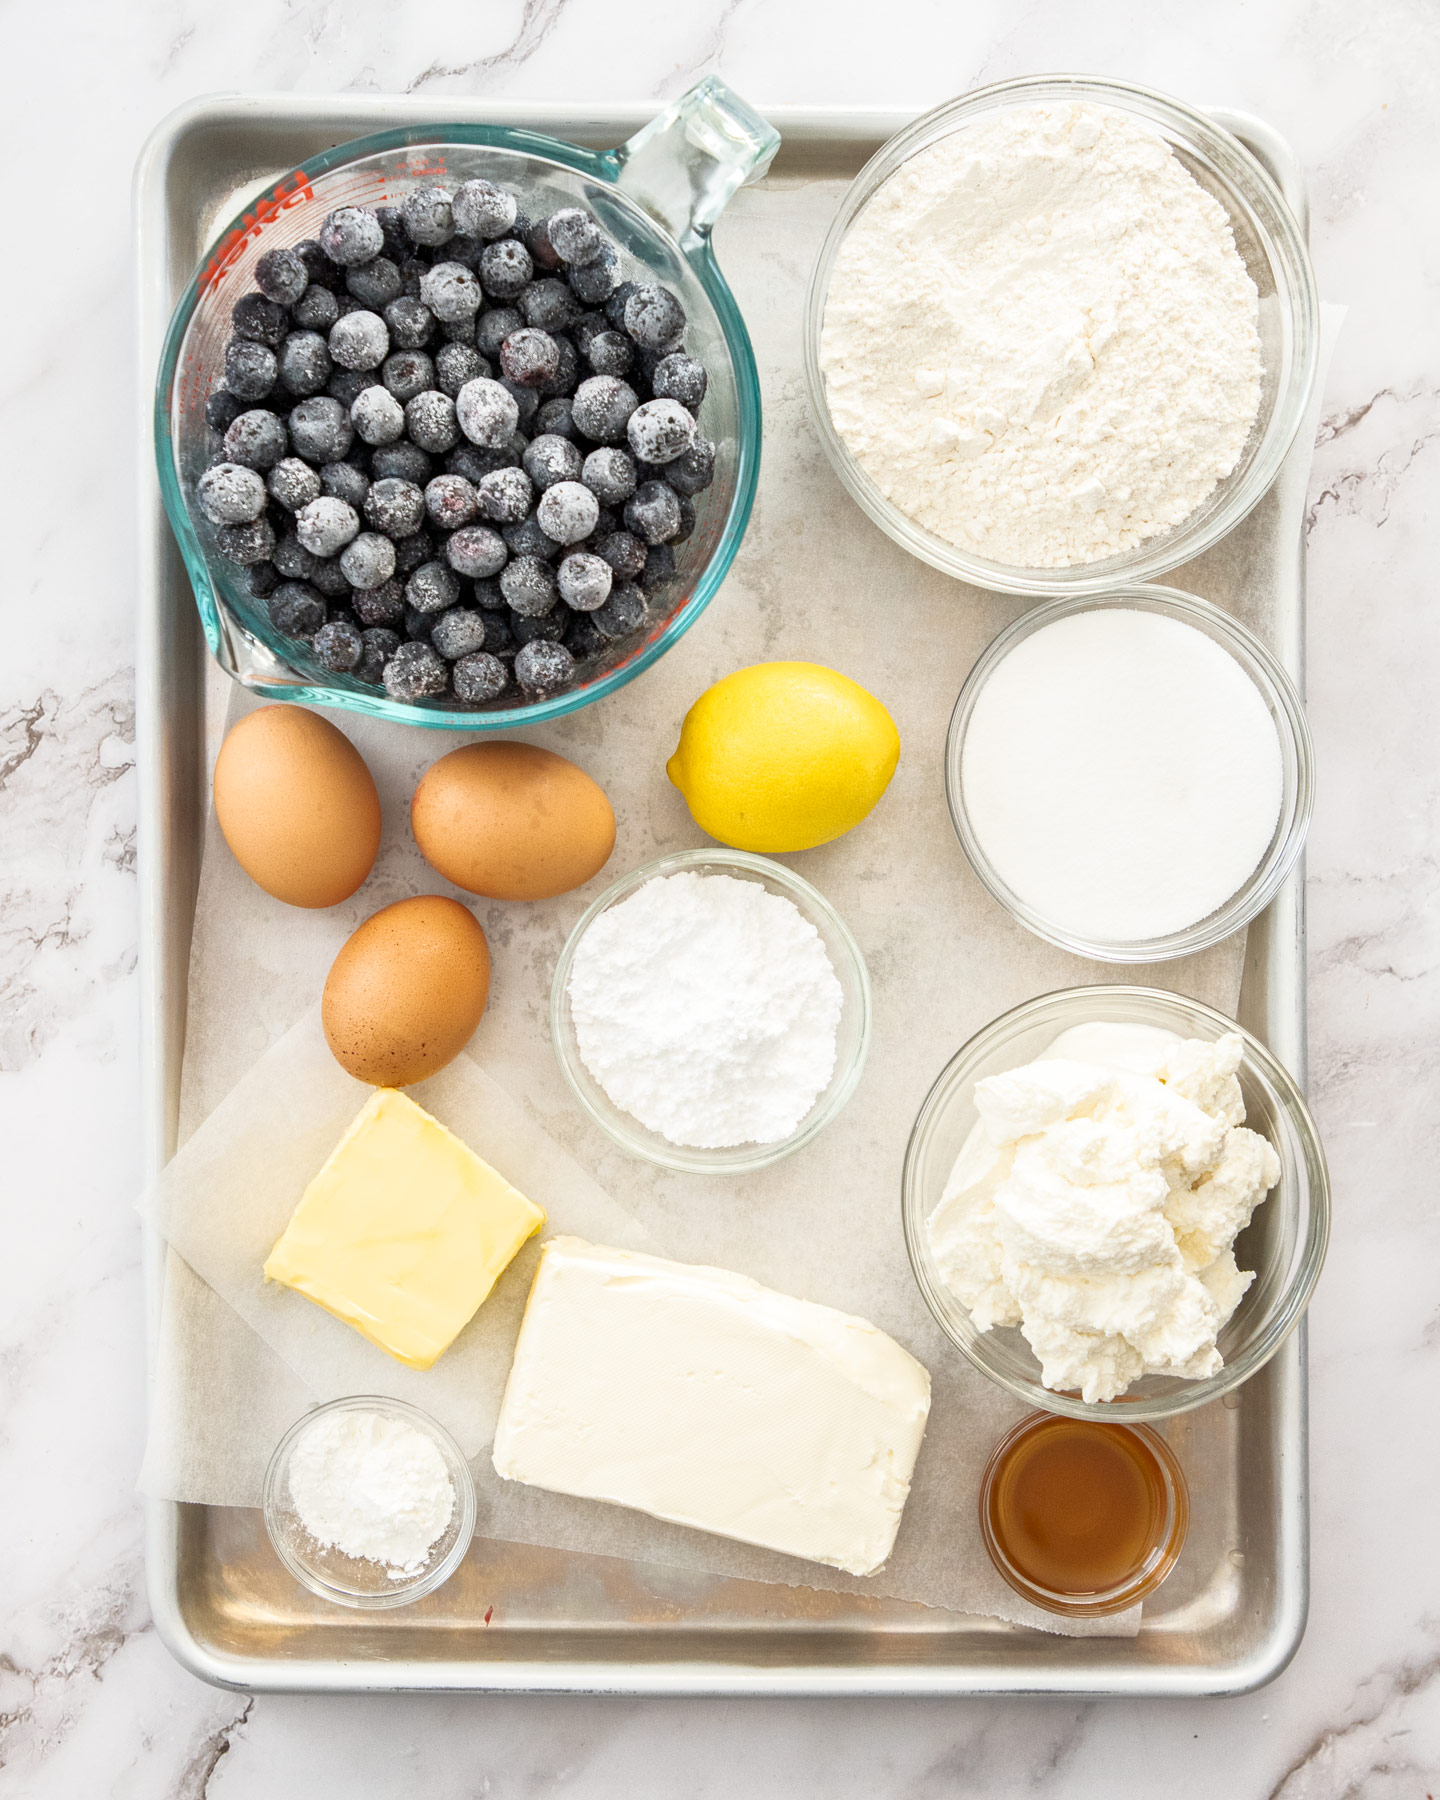 Ingredients for blueberry cheese tart on a baking tray.